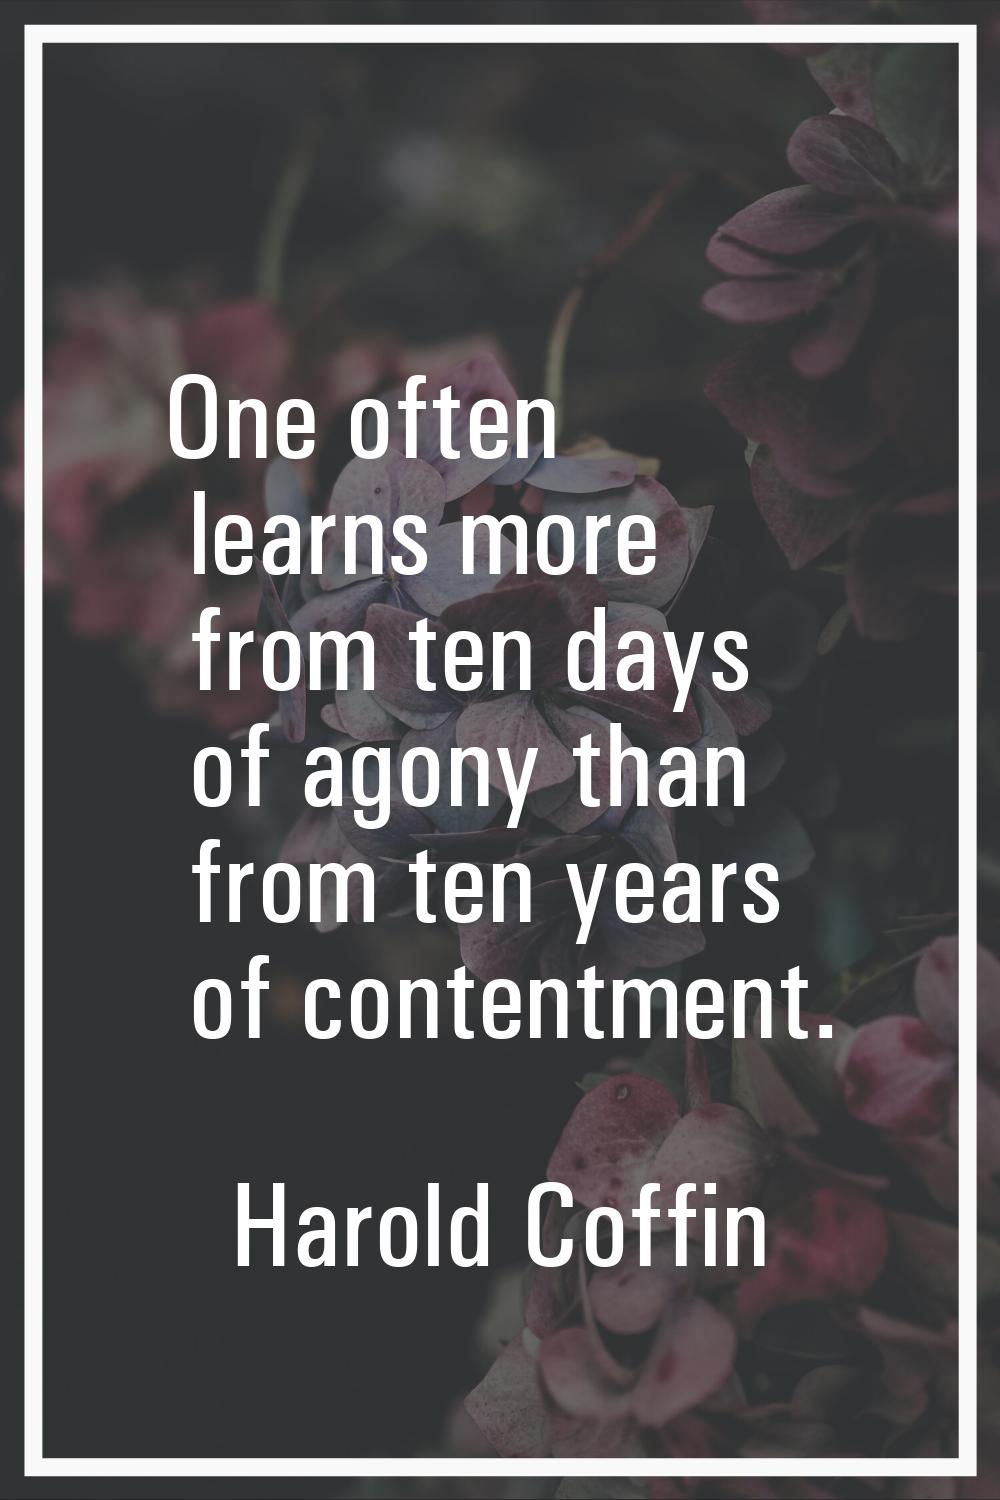 One often learns more from ten days of agony than from ten years of contentment.